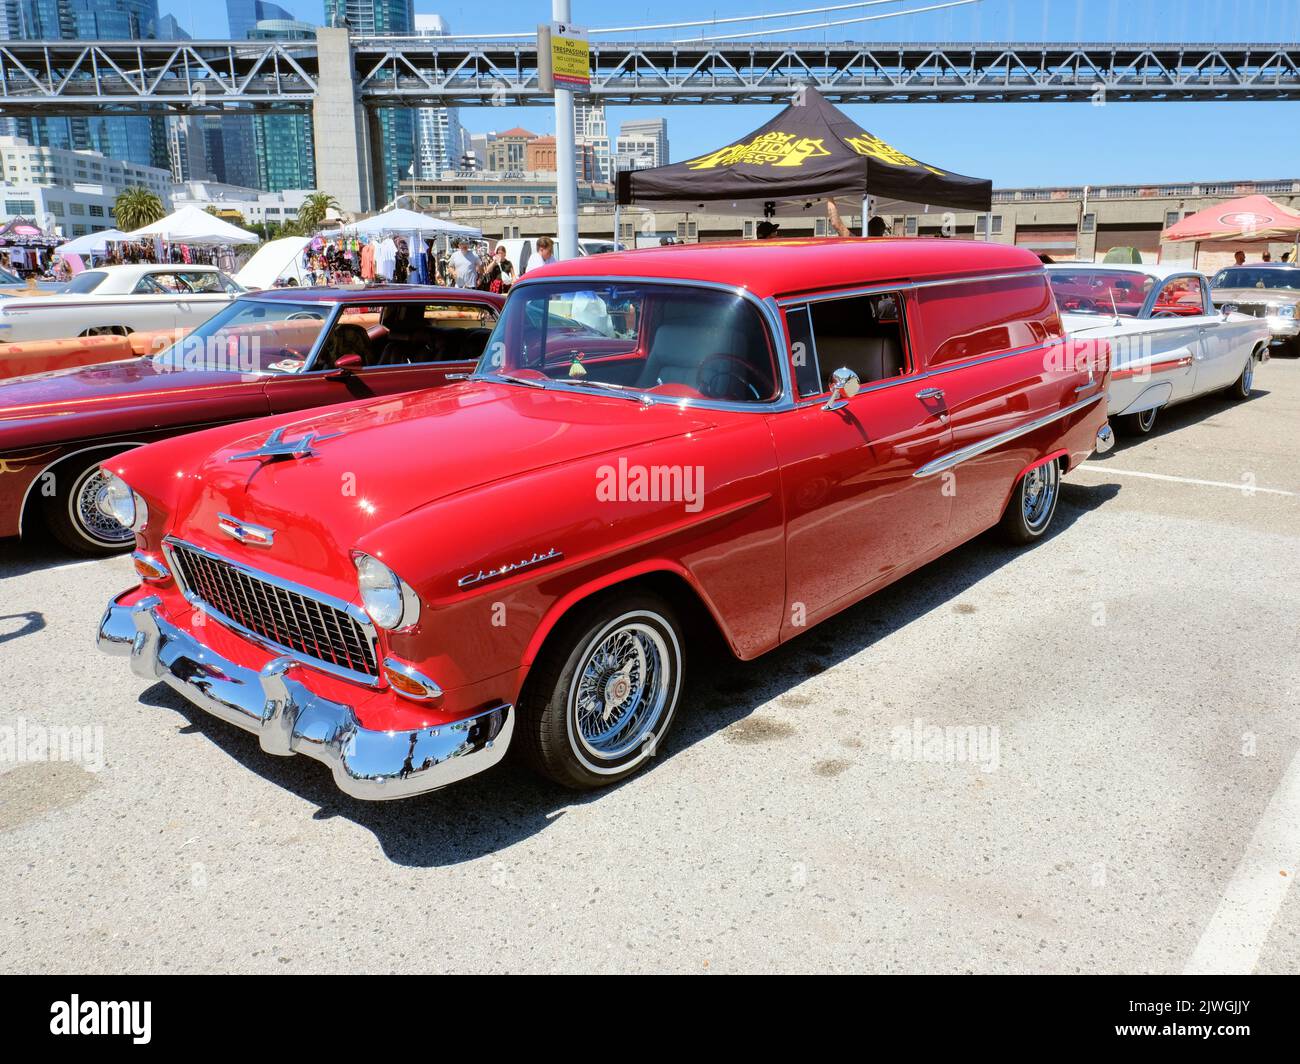 Red 1956 Handyman Chevy Station Wagon customized lowrider at a cars show in San Francisco, California; The Embarcadero. Stock Photo